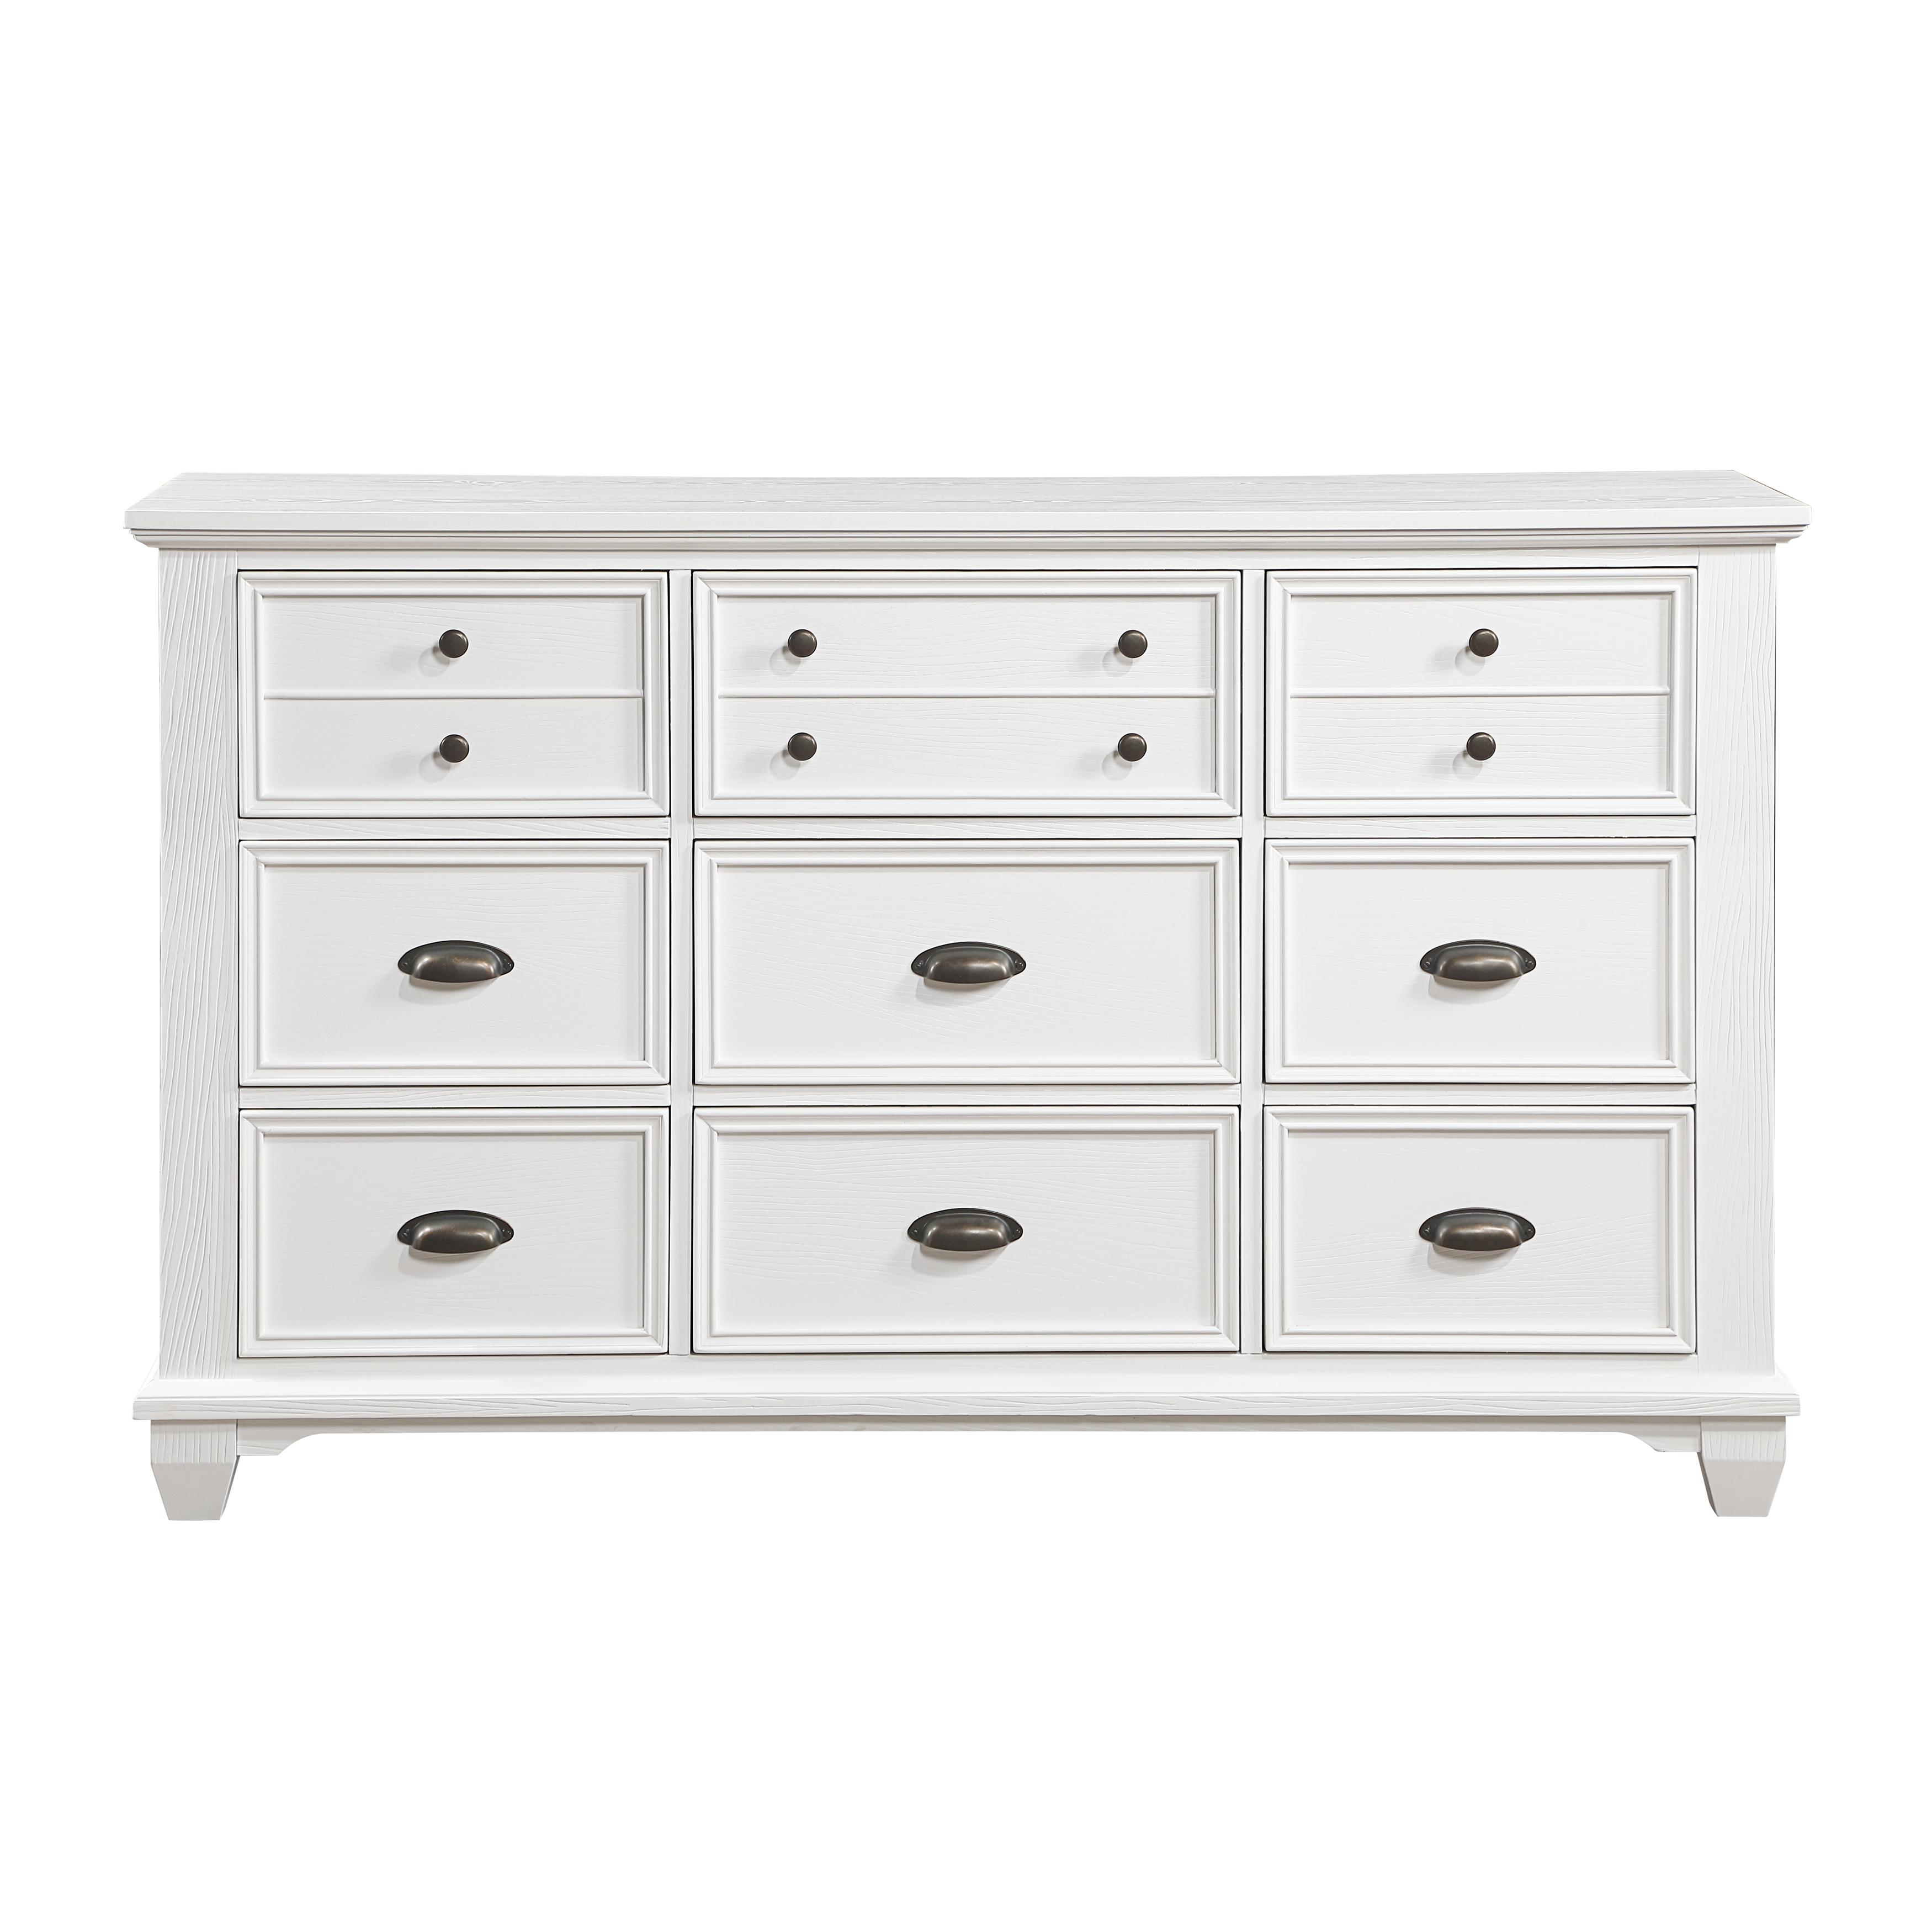 Traditional Dresser With Mirror Mackinac Collection Dresser With Mirror 1454-5-D-2PCS 1454-5-D-2PCS in White Finish 